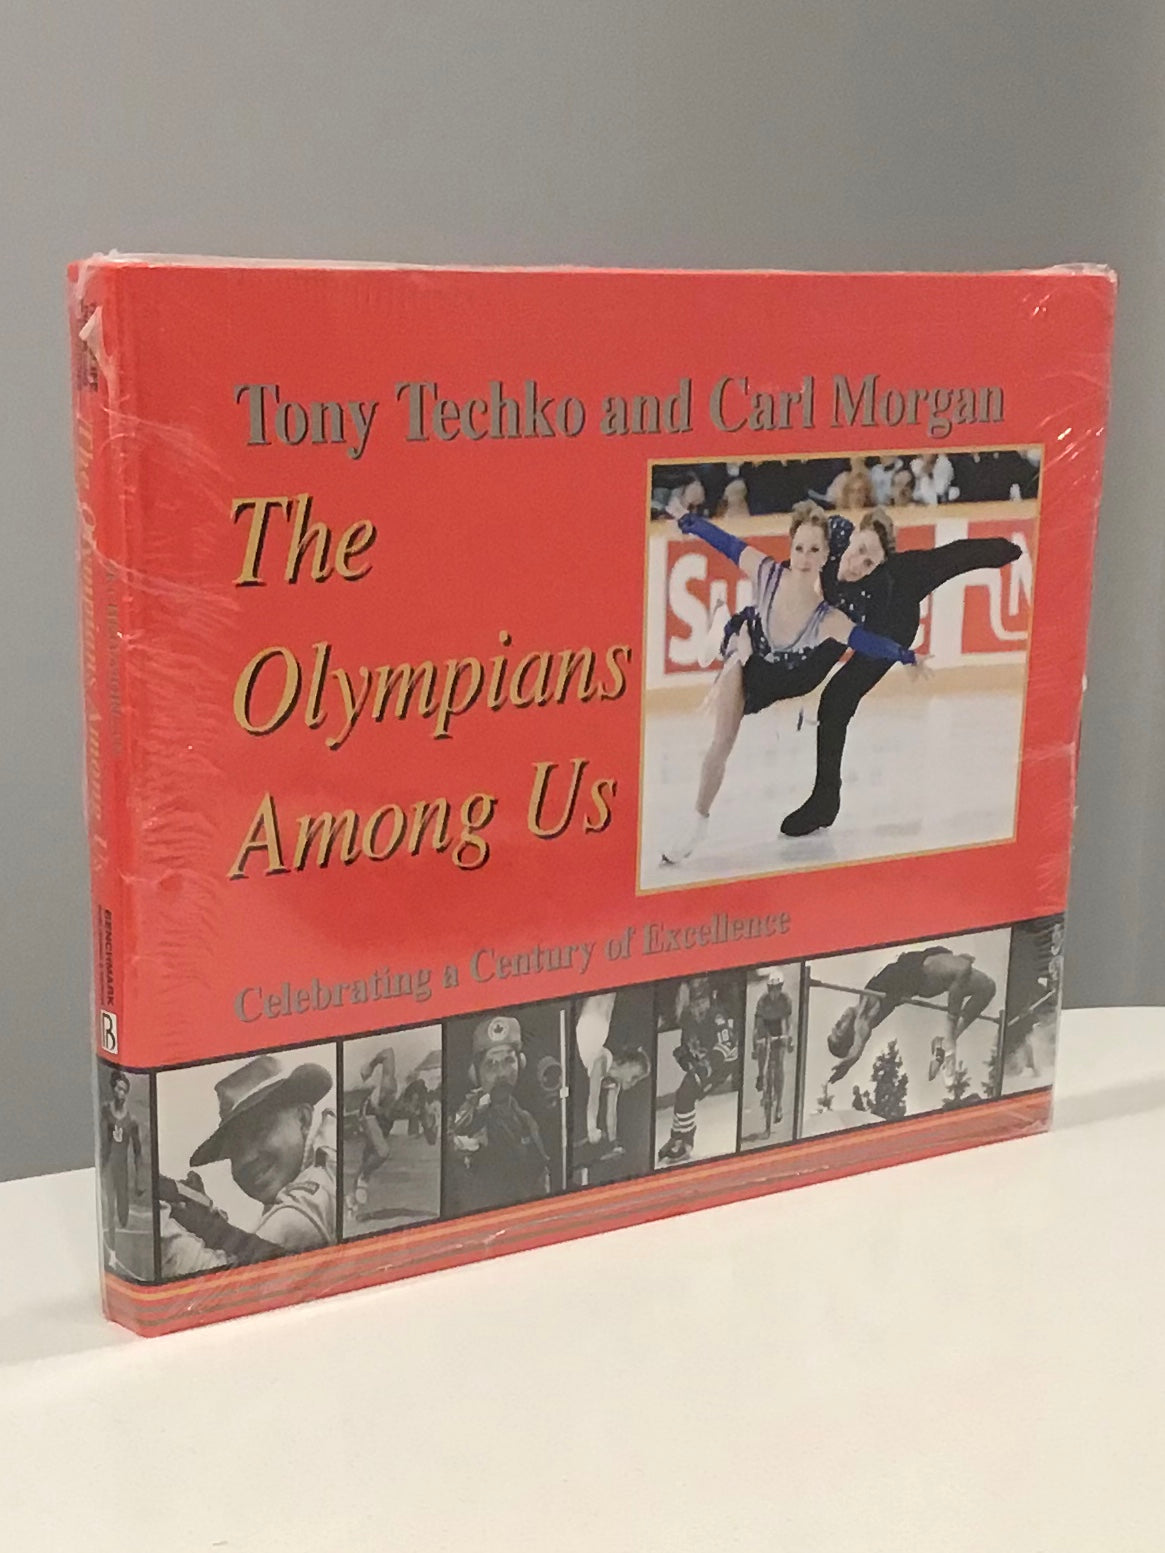 The Olympians Among us; Celebrating a Century of Excellence